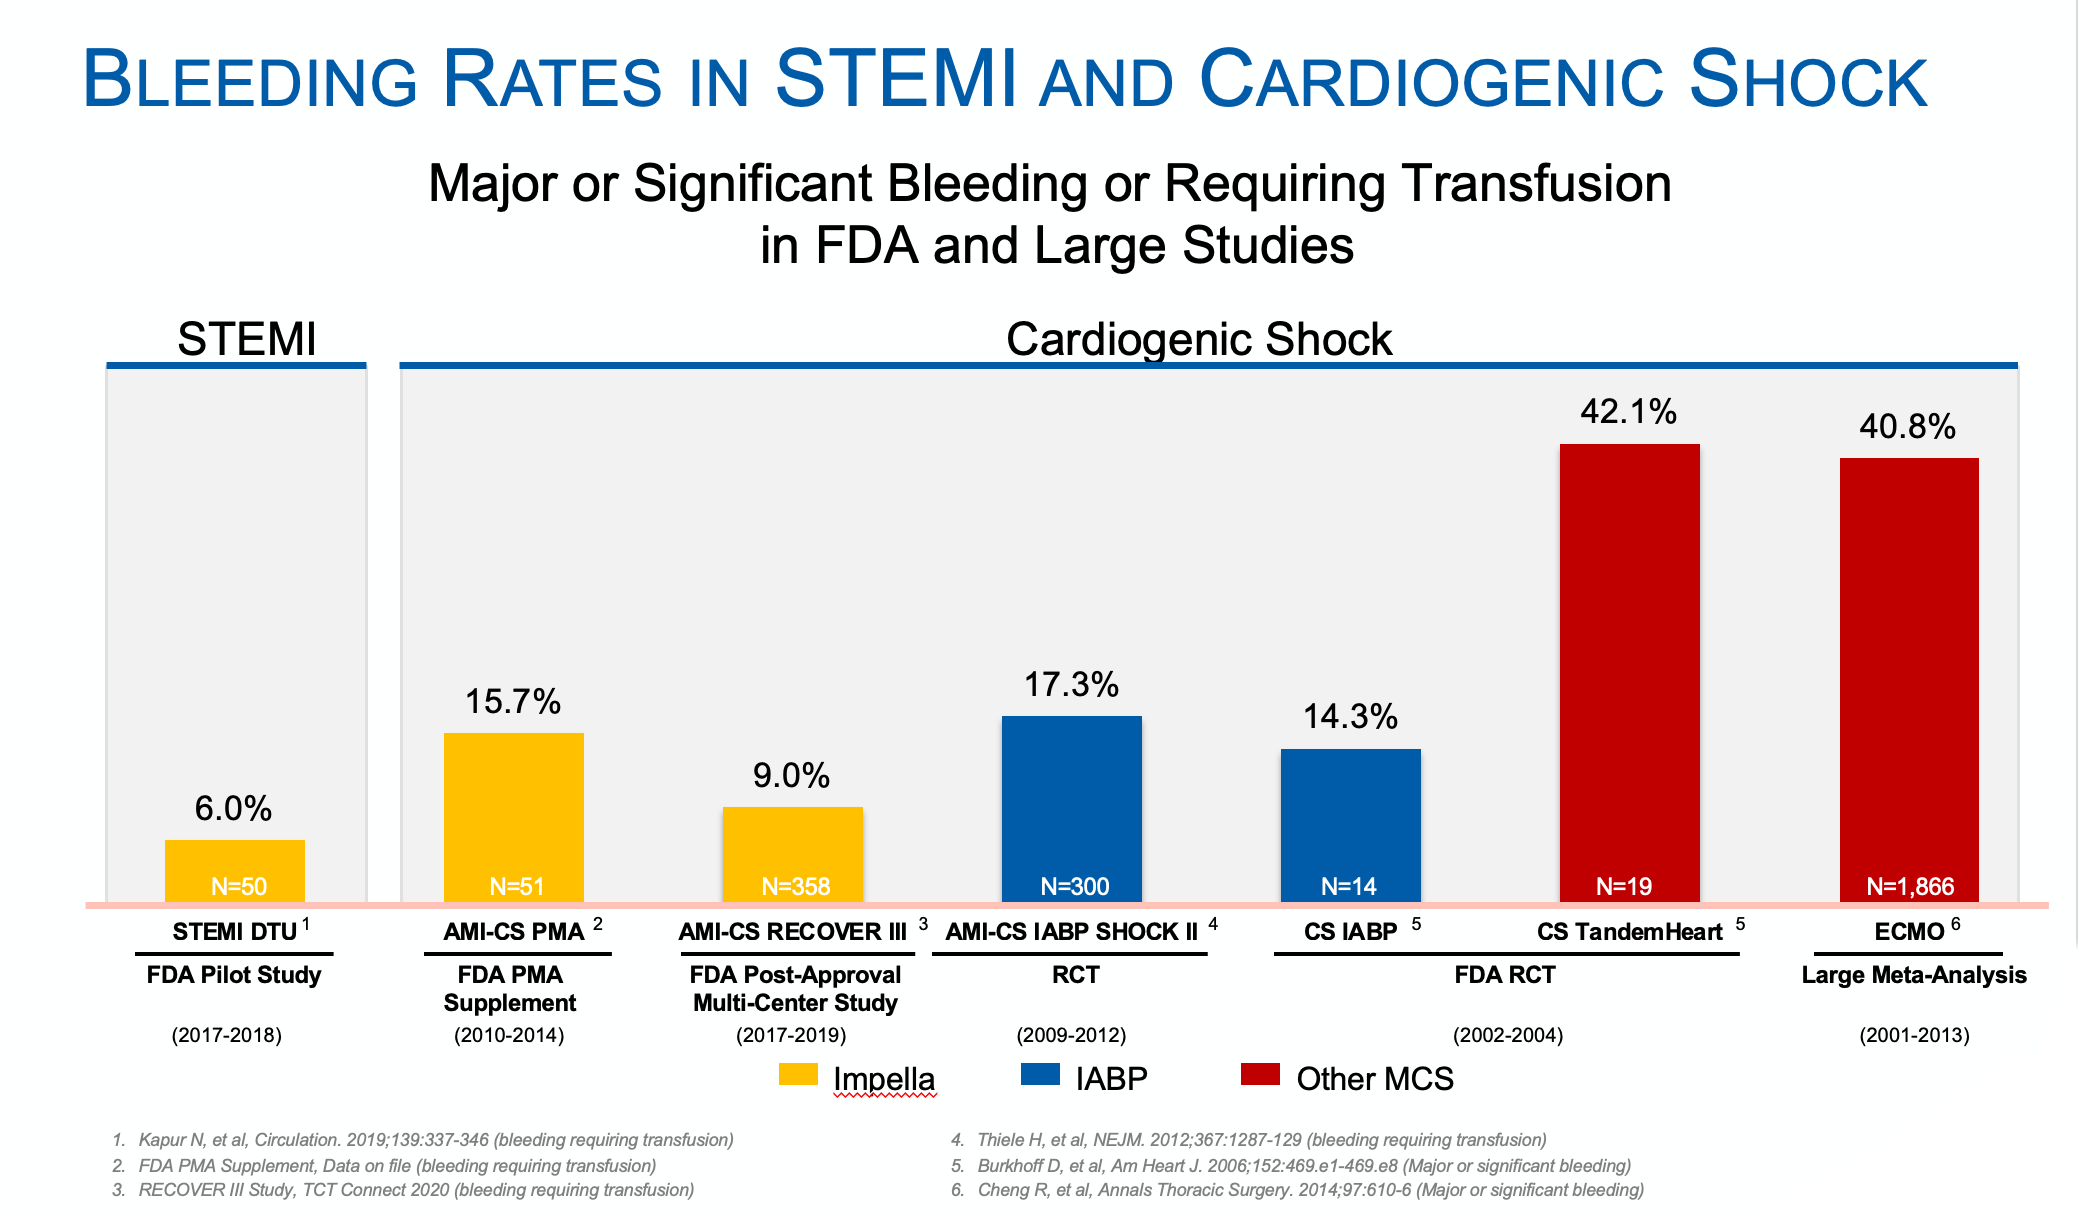 Graph displaying bleeding rates reported in FDA and large studies